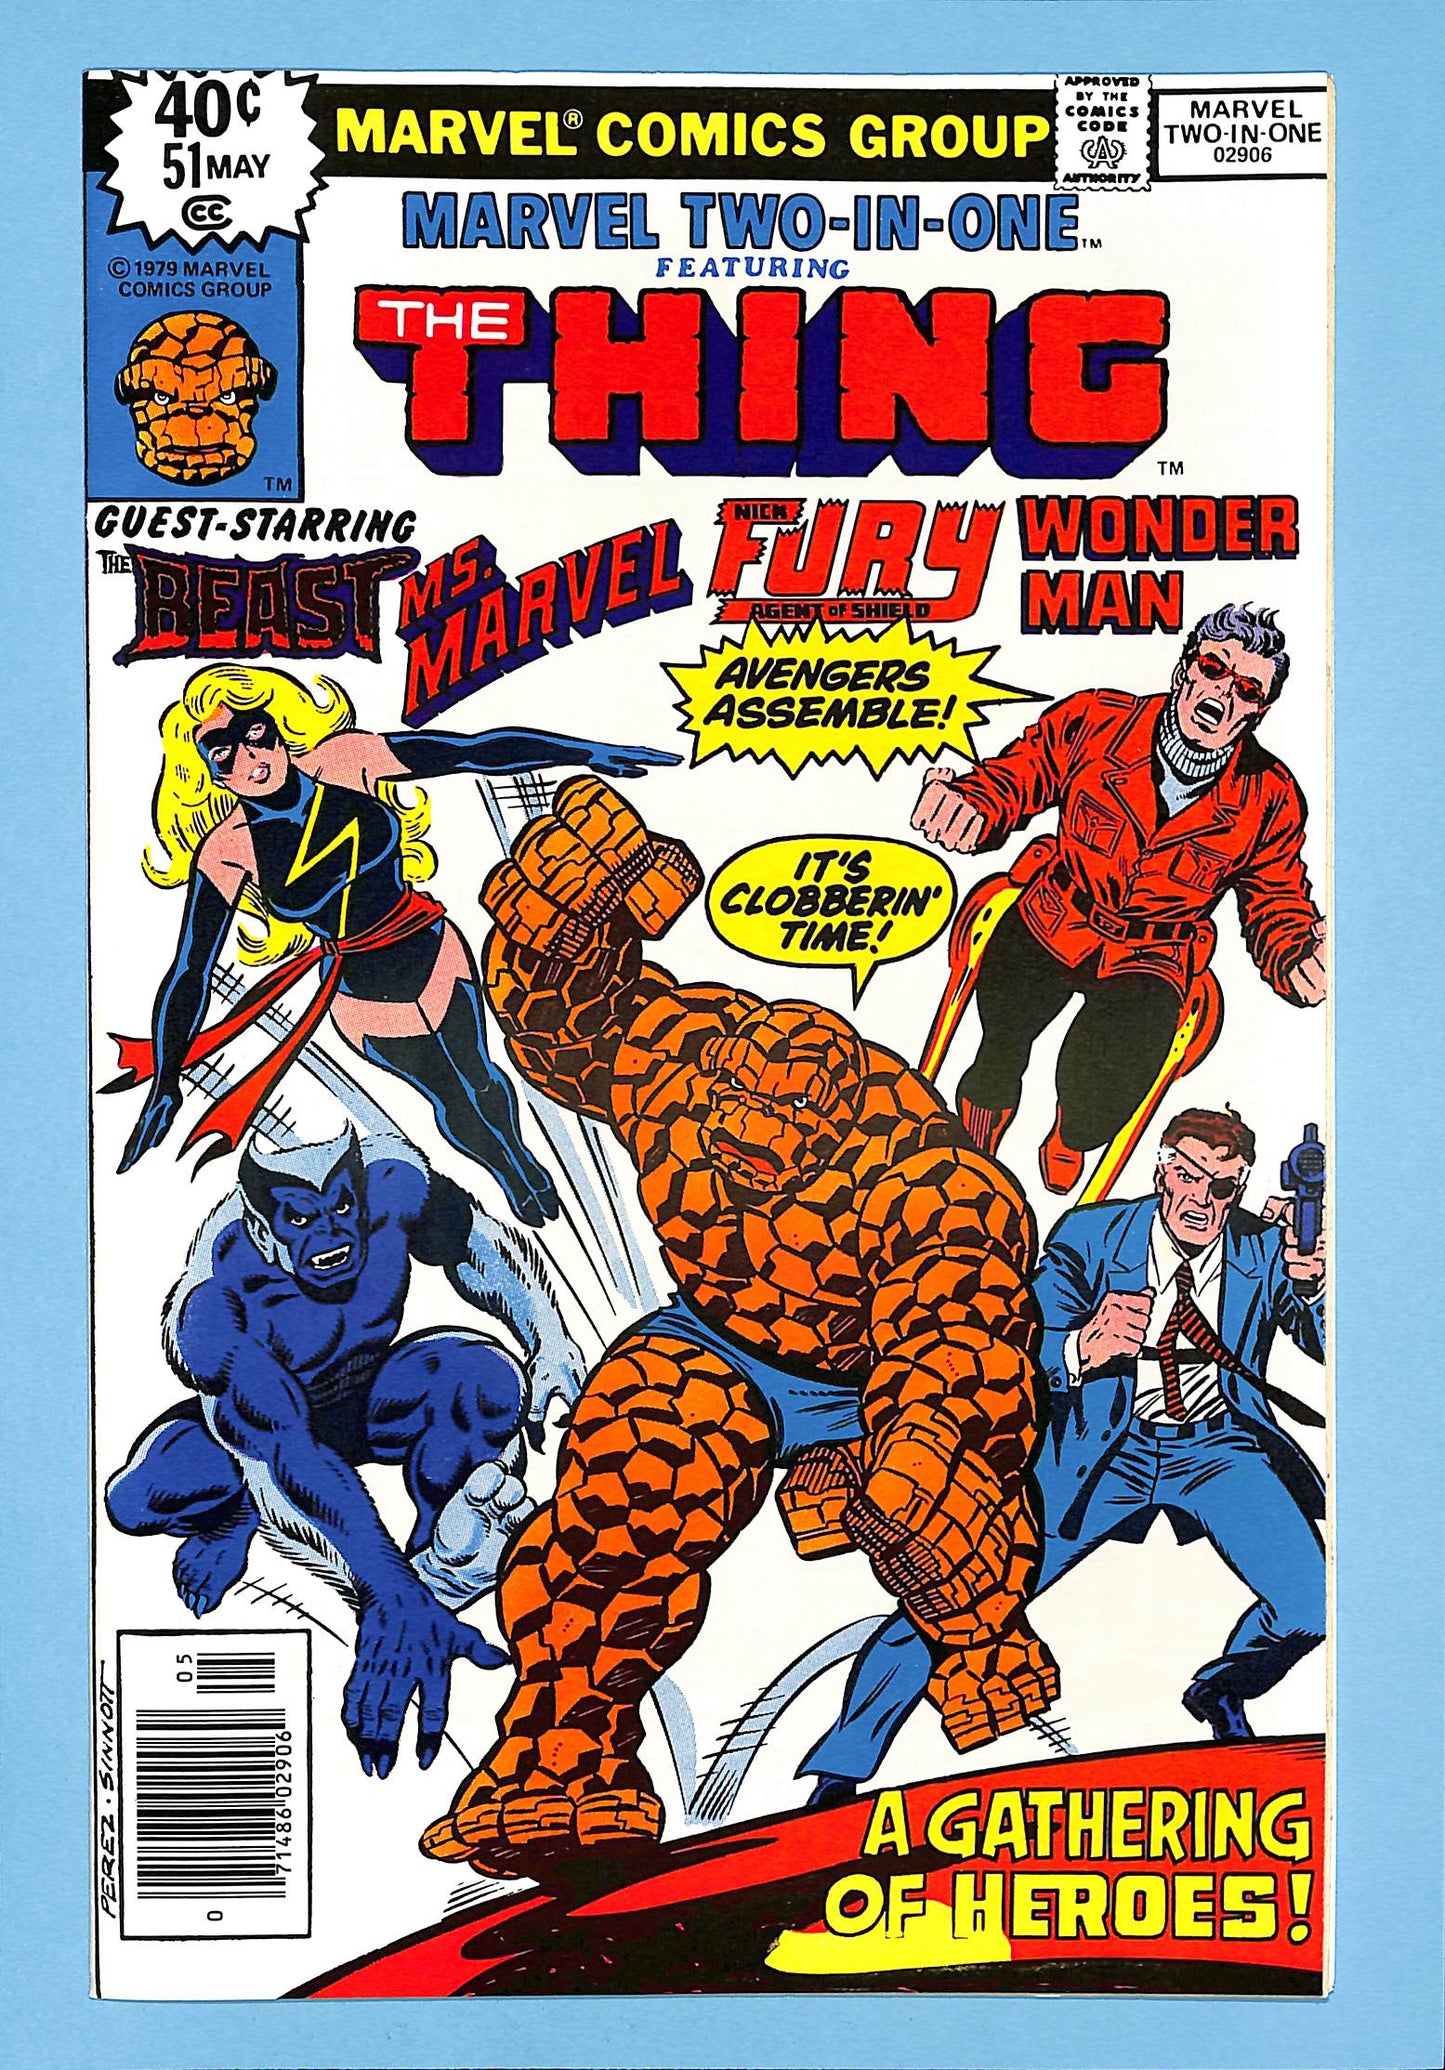 Marvel Two-In-One #51 The Thing, The Beast, Ms. Marvel, Nick Fury, Wonder Man (3)